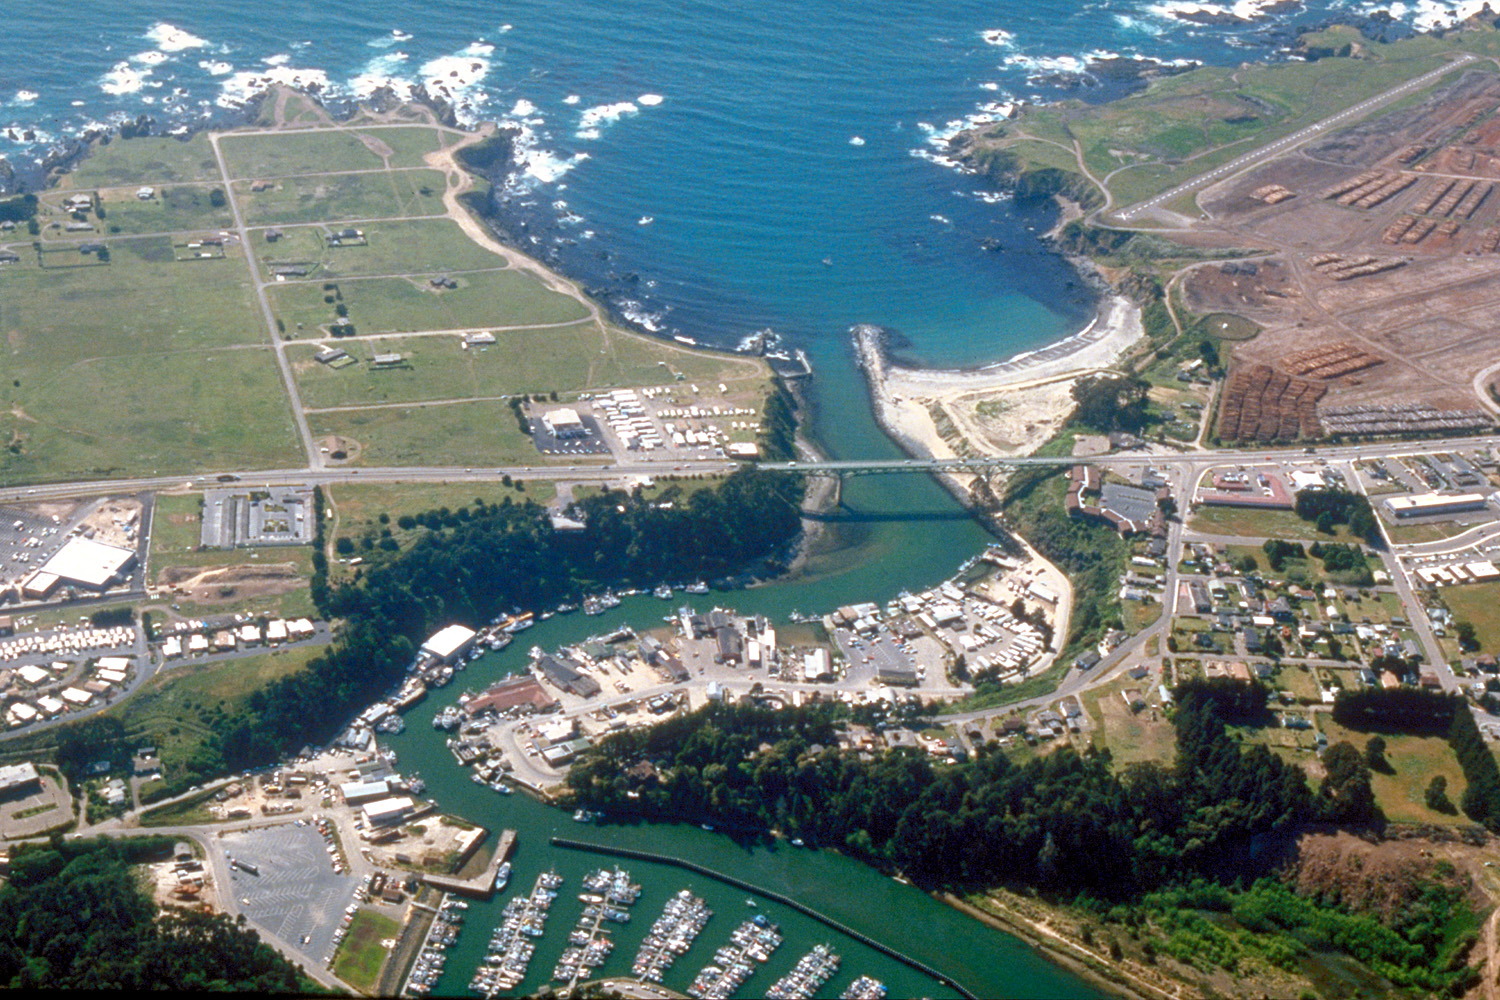 Child abuse & vengeance in picturesque Fort Bragg, CA